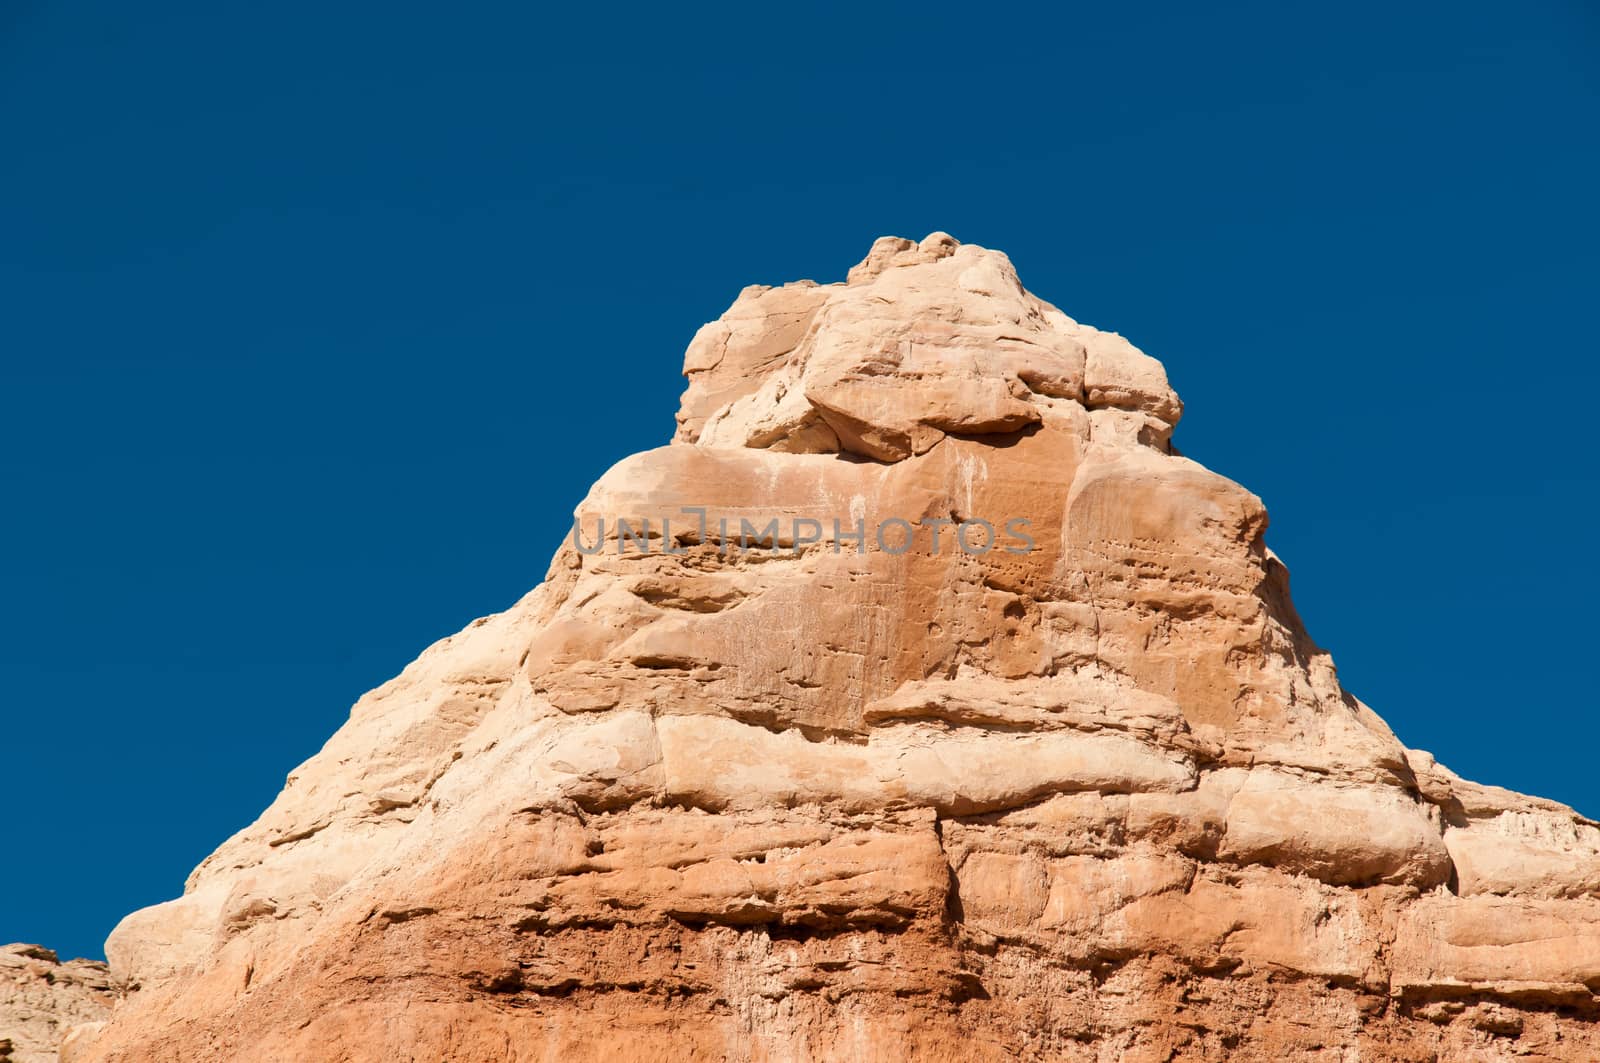 Geological formations in southern Utah